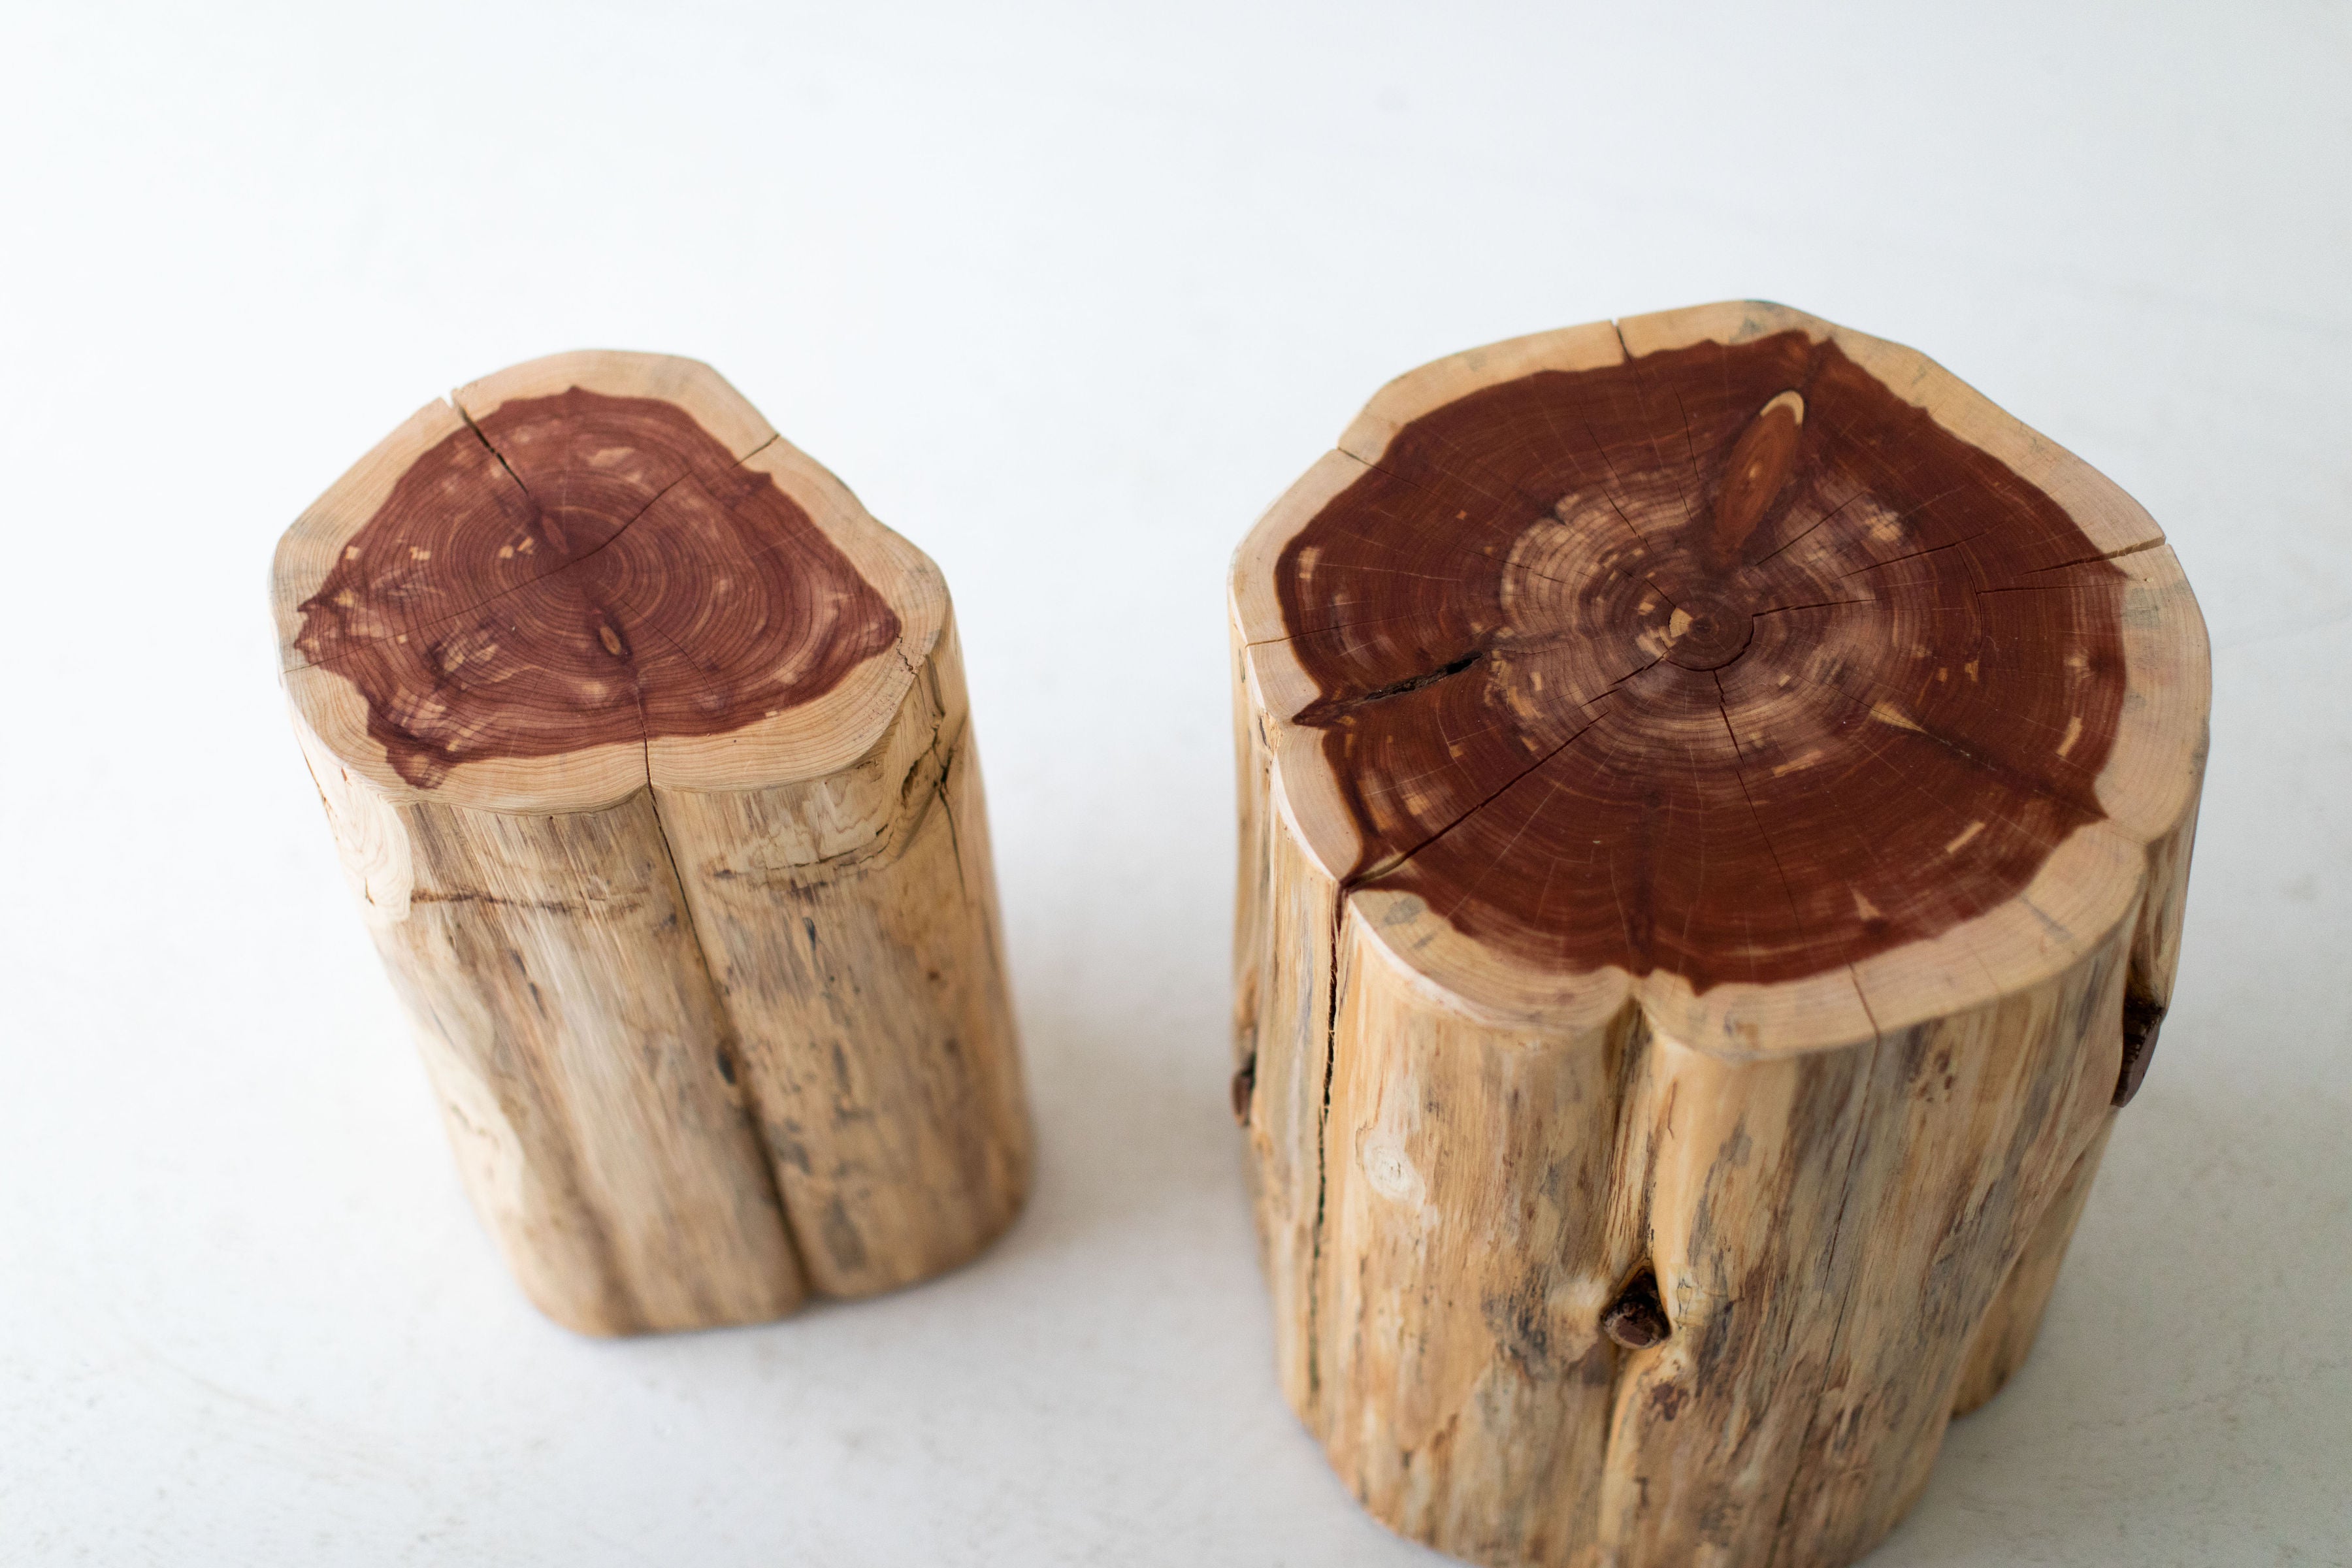 Large Tree Stump Side Tables - 1419 - Natural